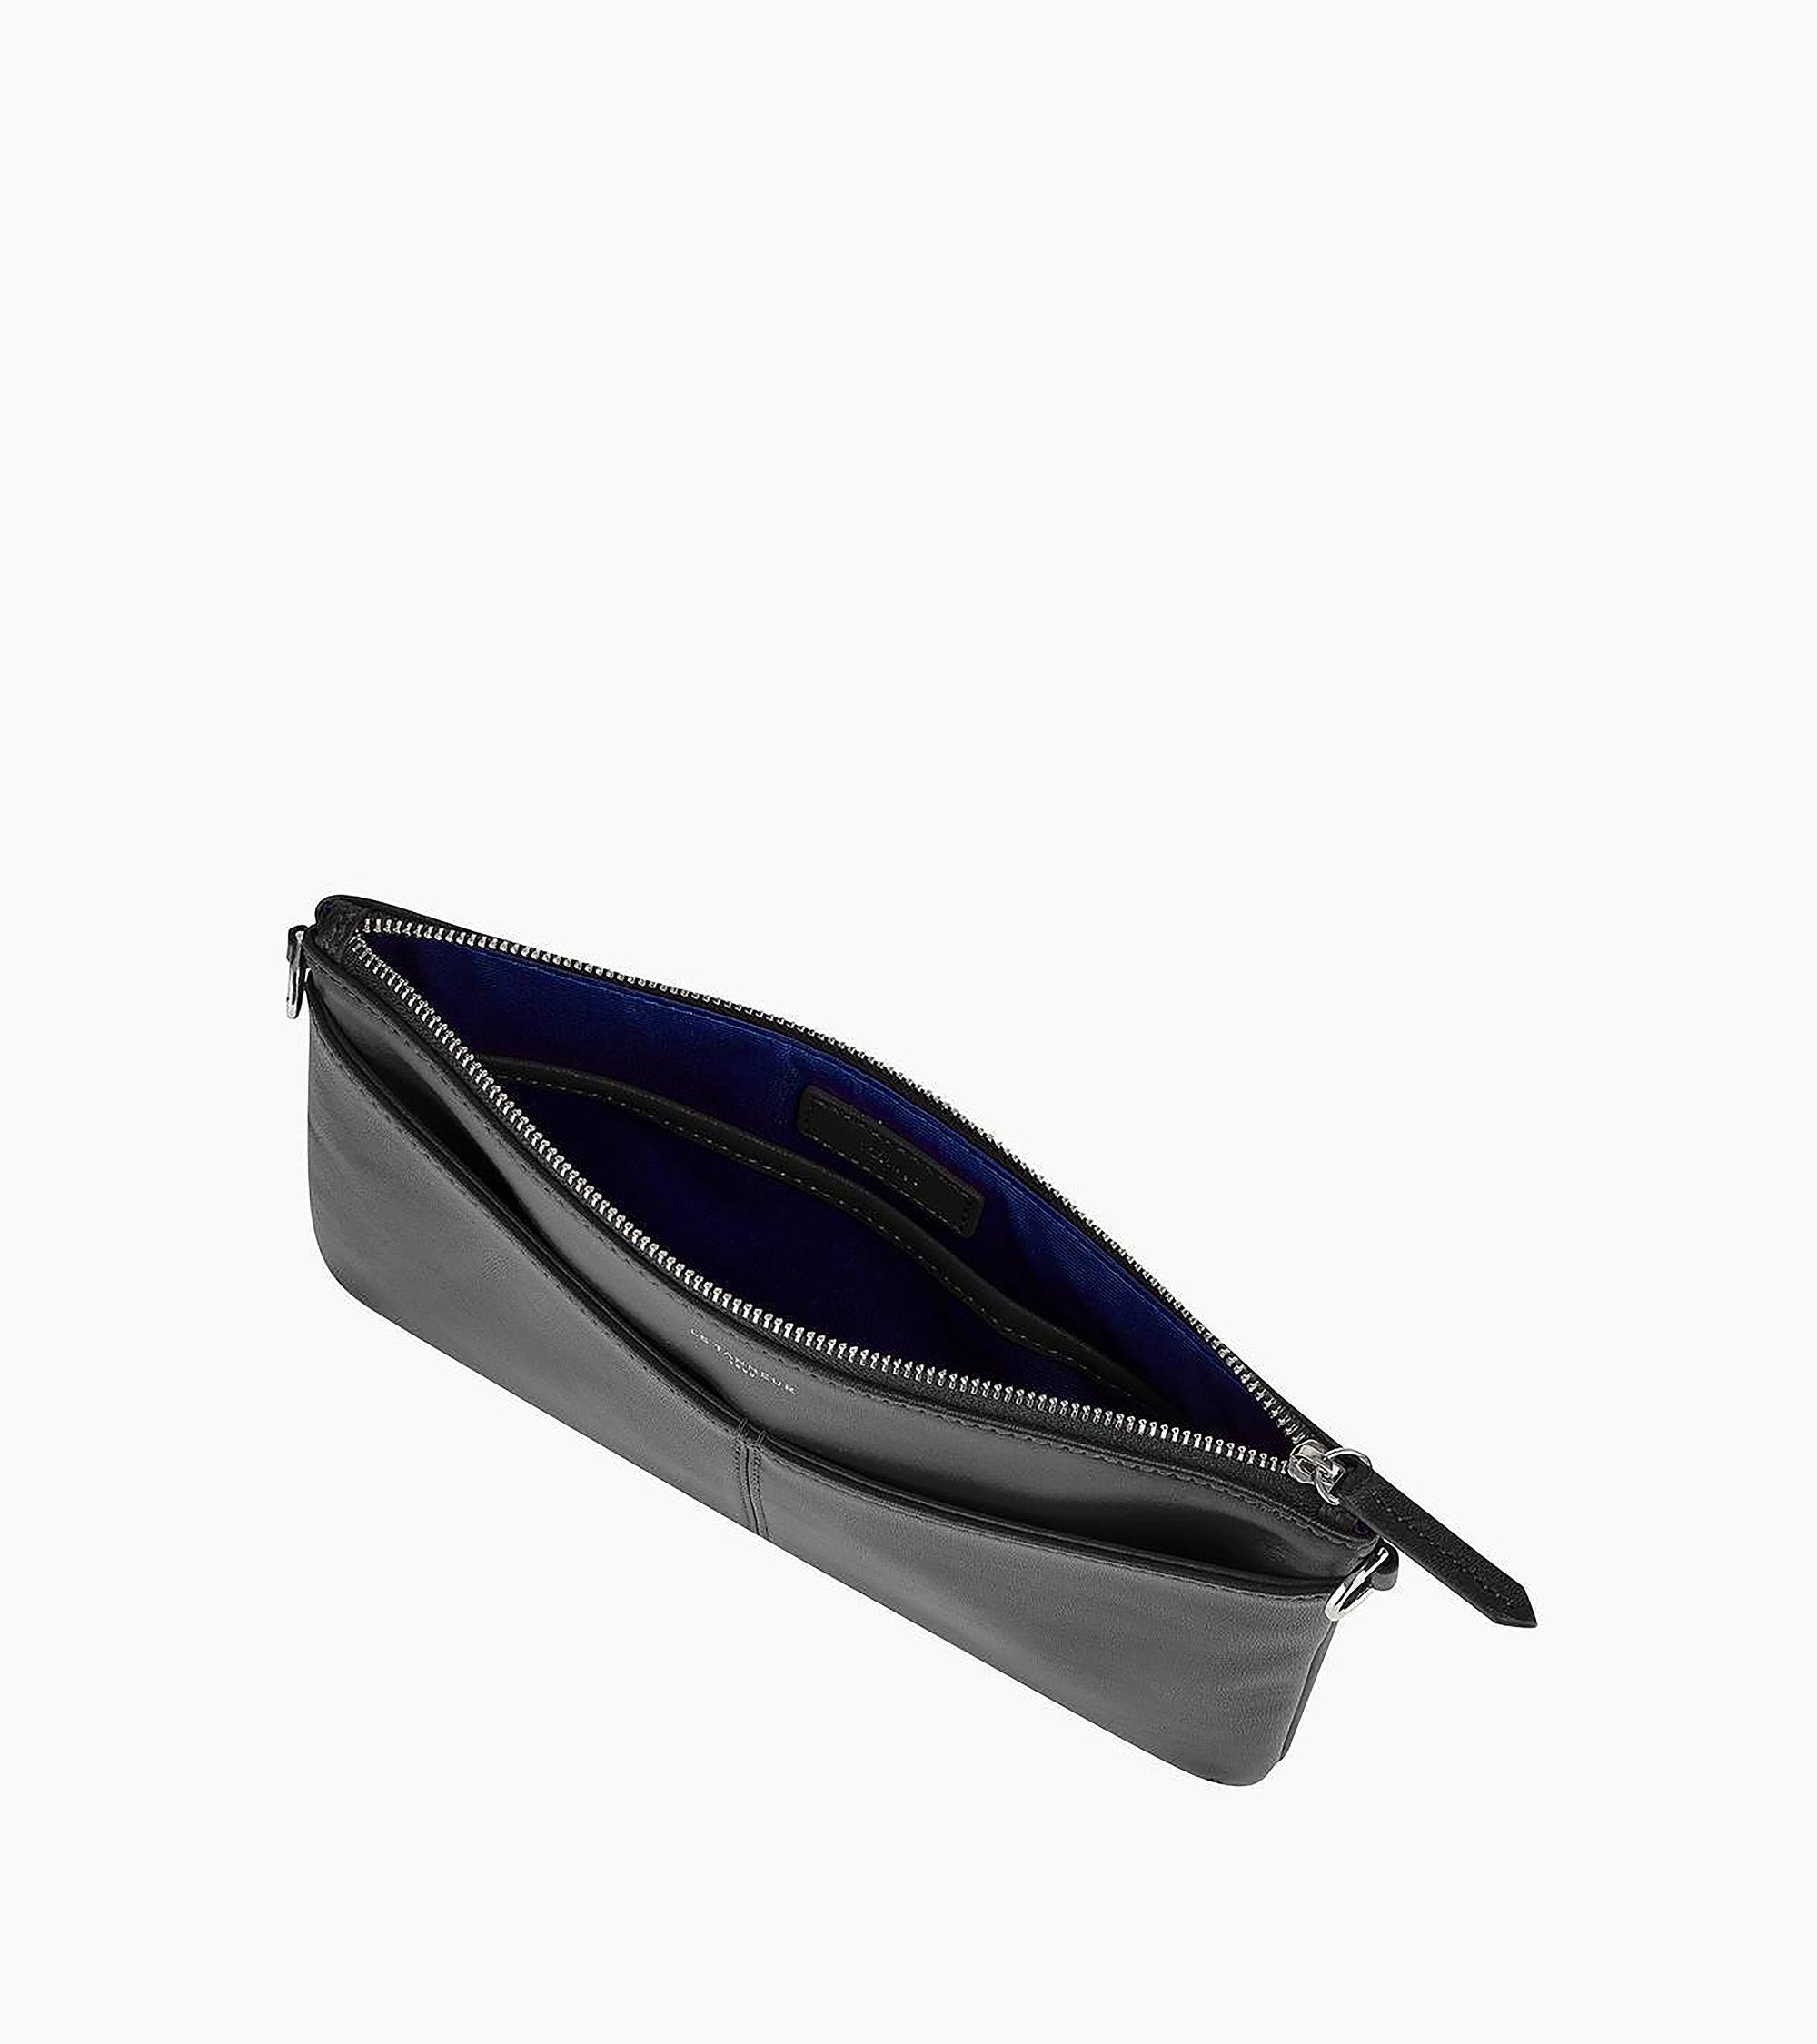 Zipped Charlotte pouch with removable strap in smooth leather